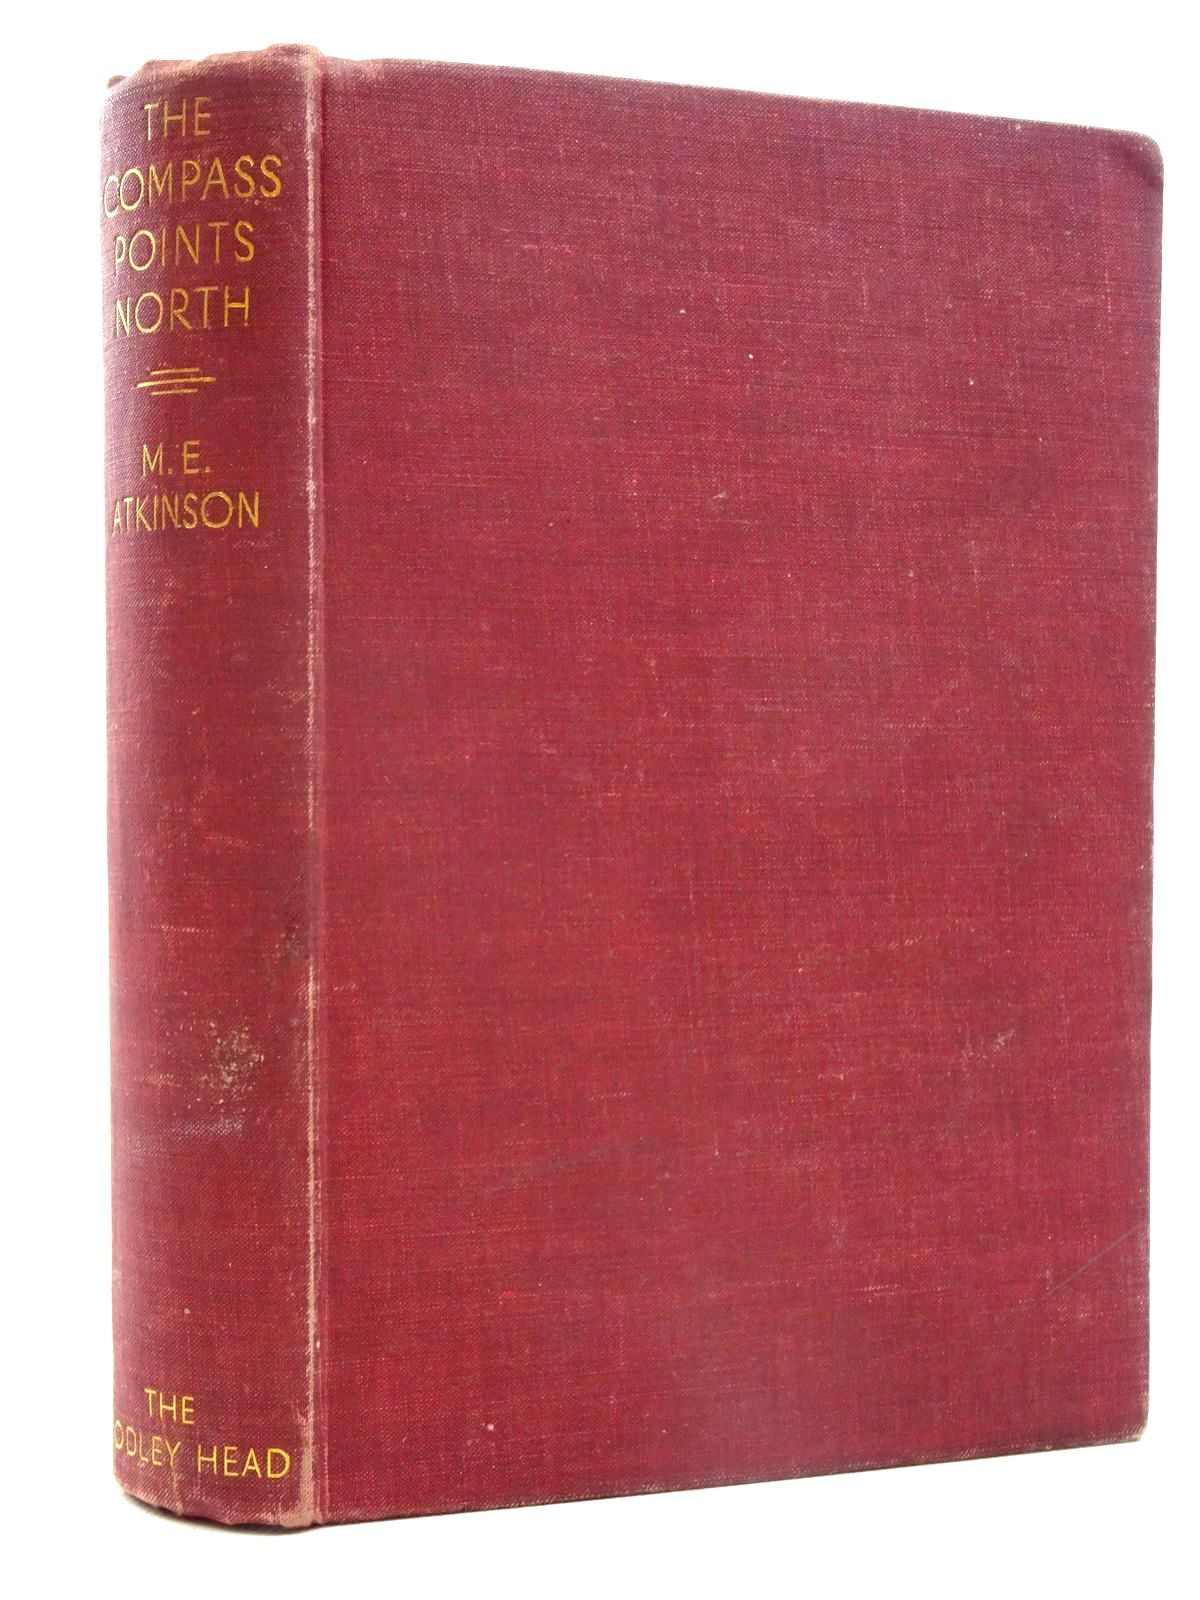 Photo of THE COMPASS POINTS NORTH written by Atkinson, M.E. illustrated by Jones, Harold published by John Lane The Bodley Head (STOCK CODE: 2125706)  for sale by Stella & Rose's Books